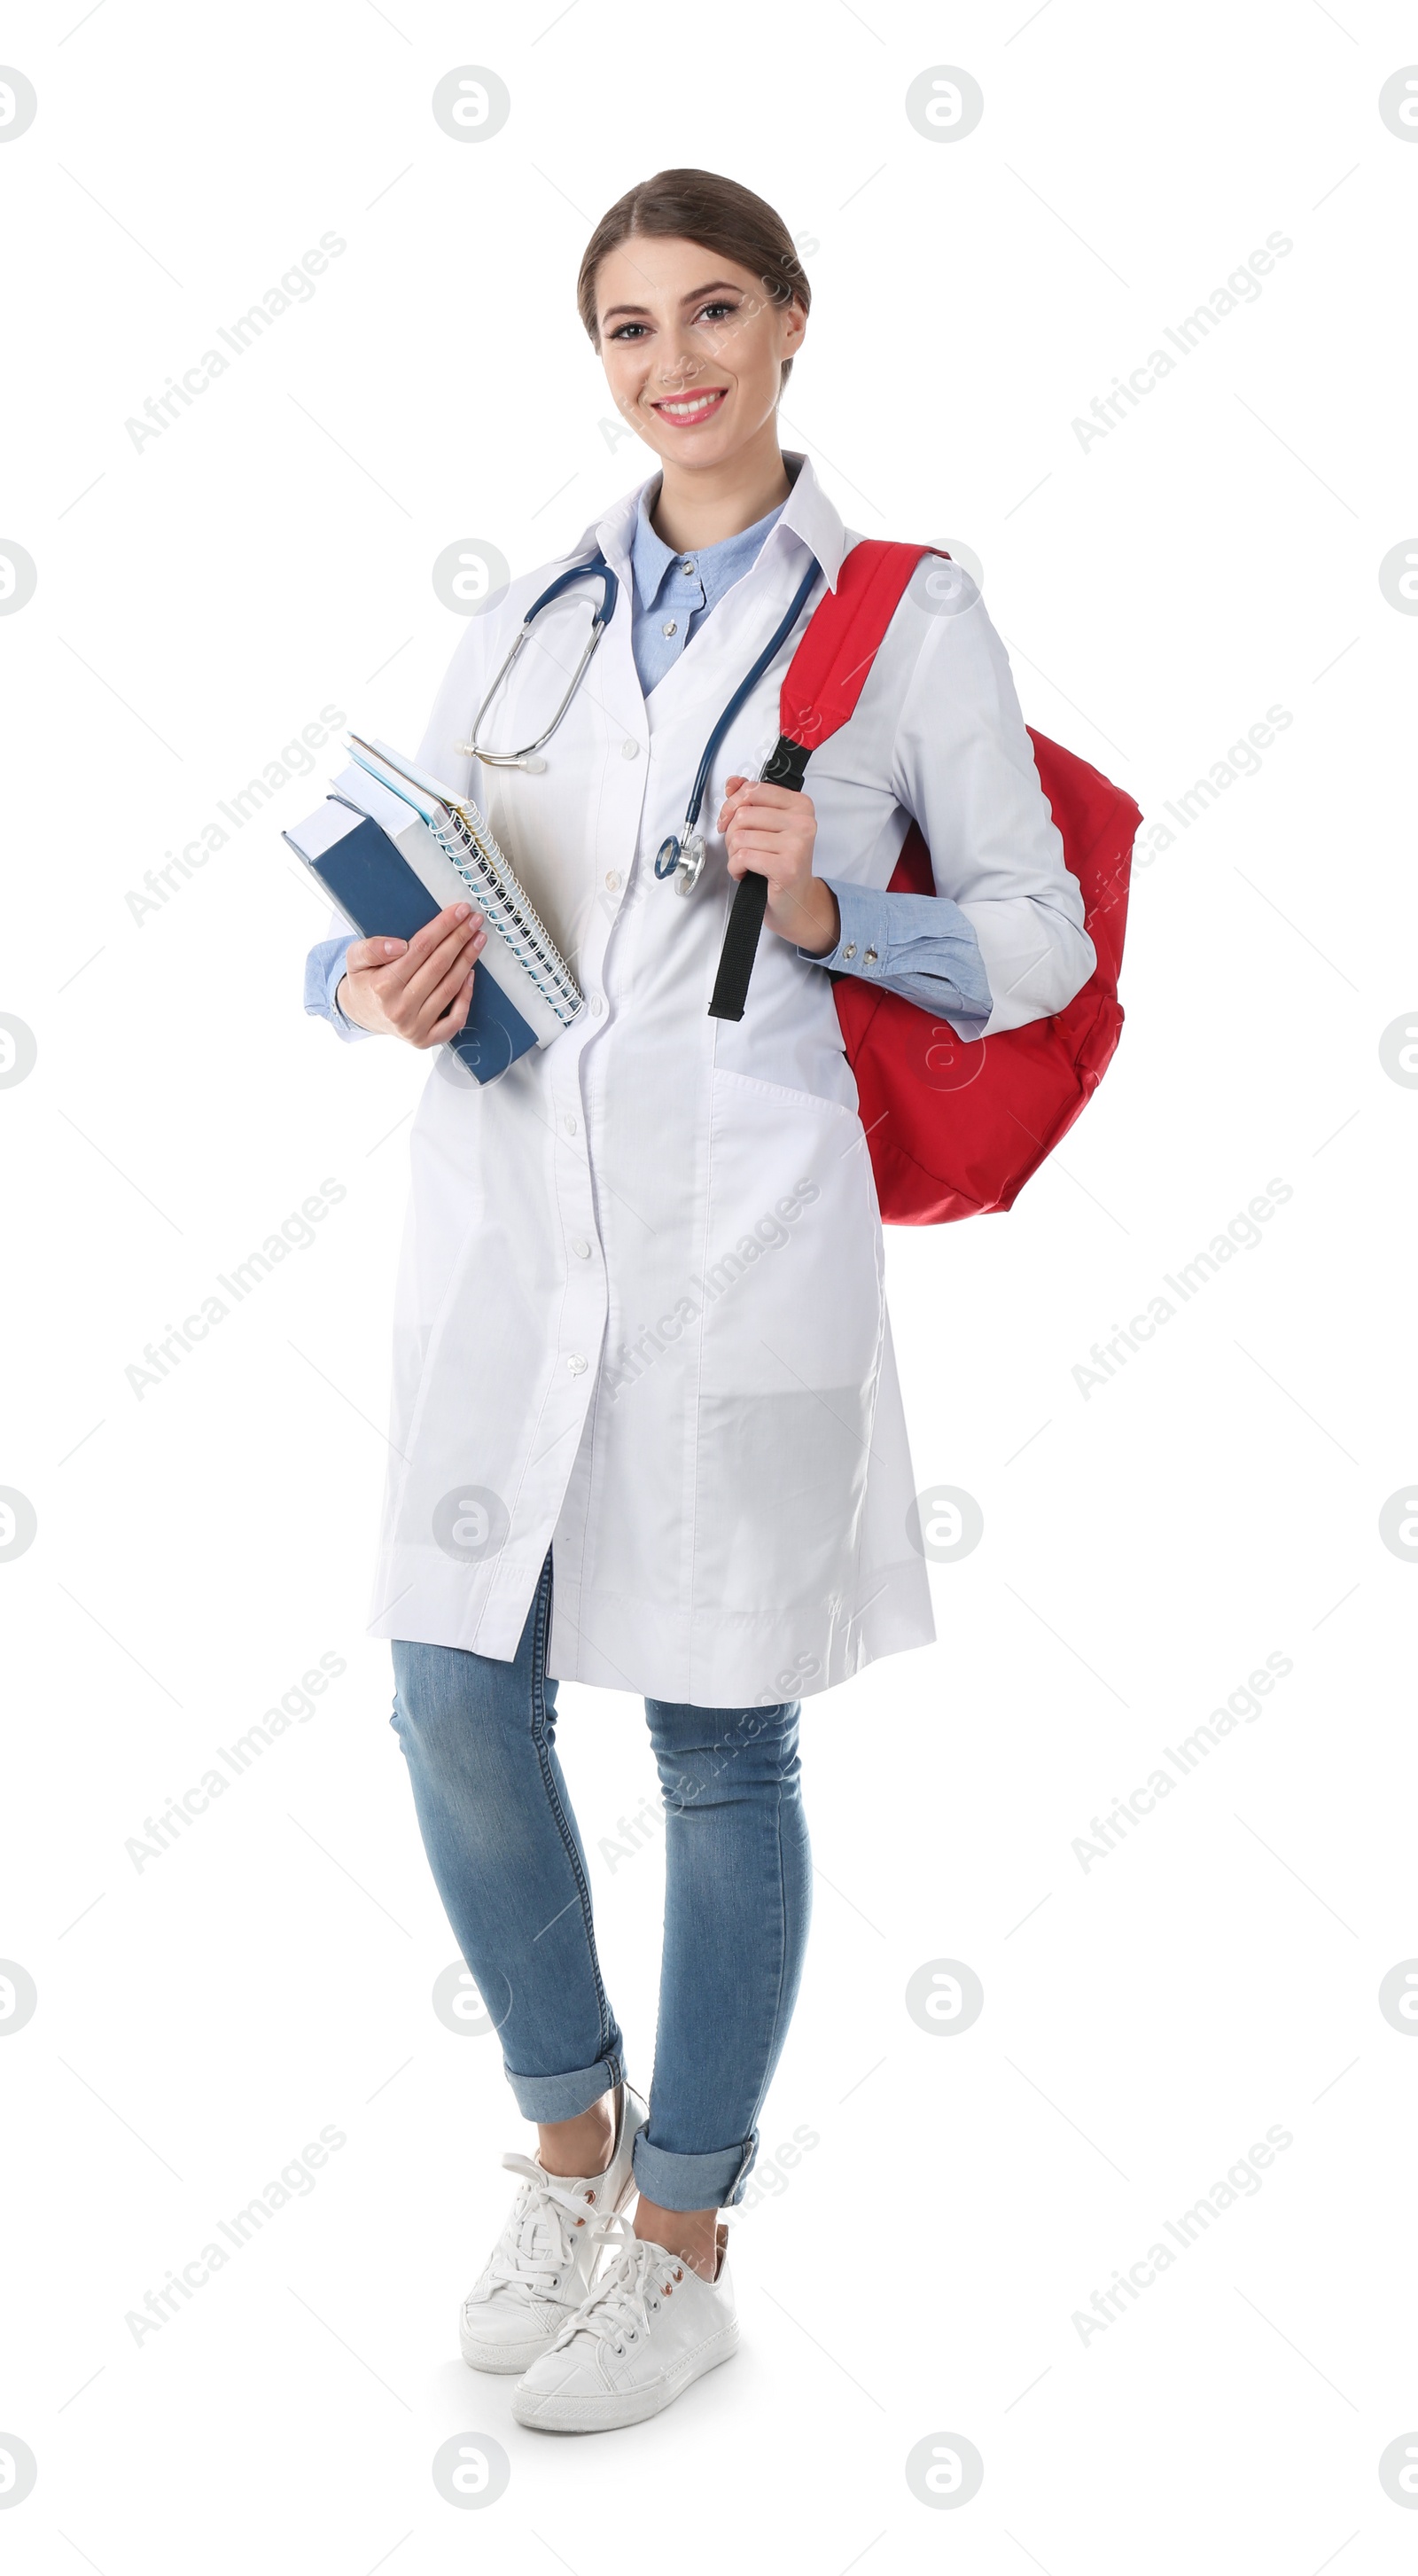 Photo of Young medical student with books and backpack on white background